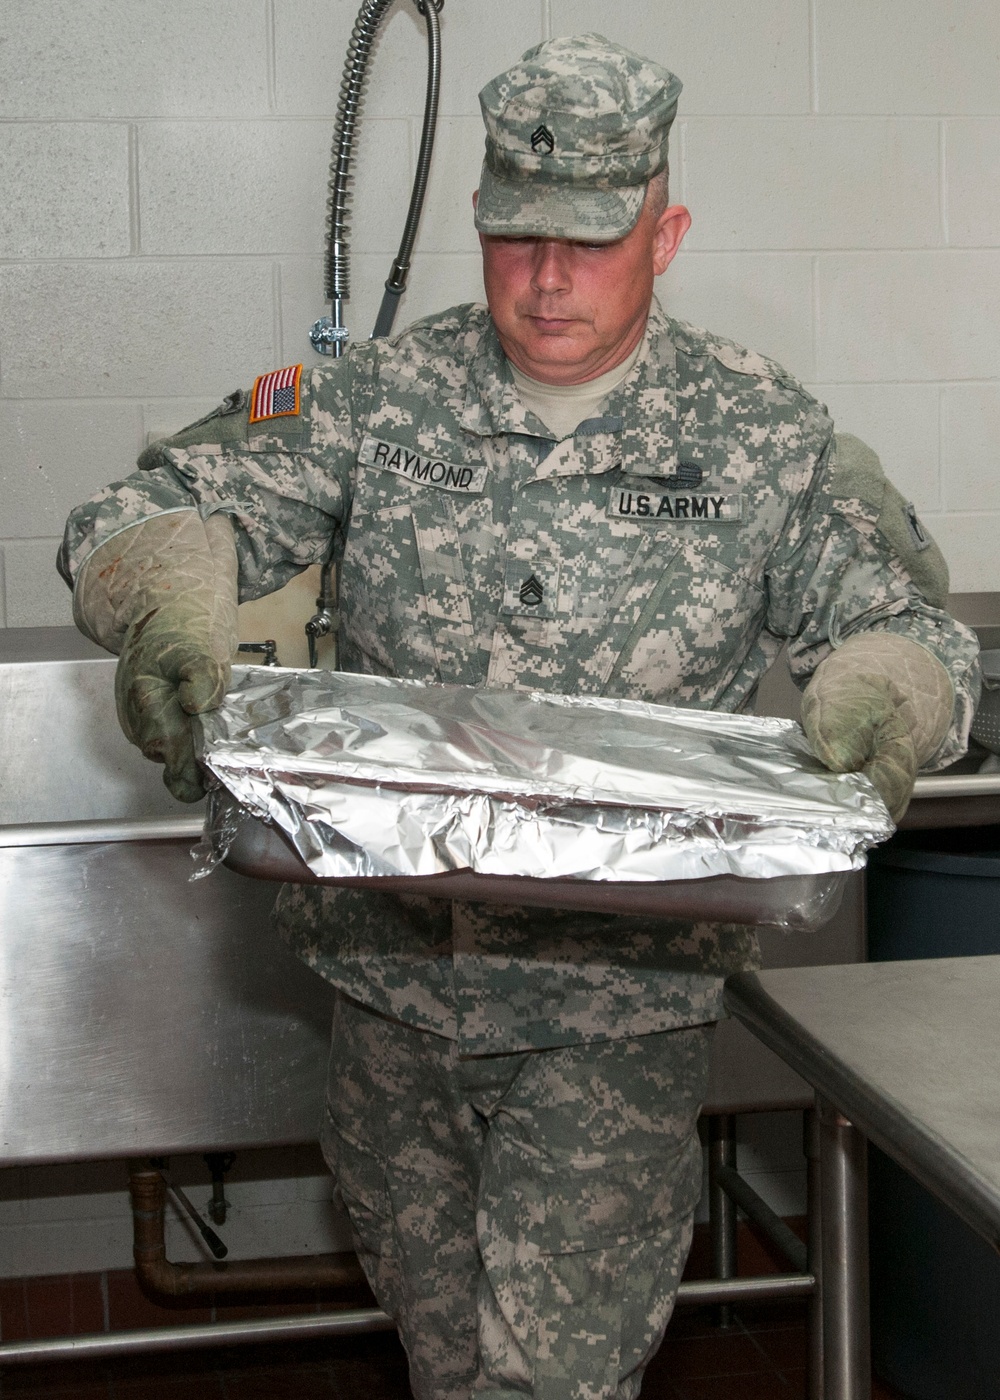 Soldiers Moves Dish to Oven